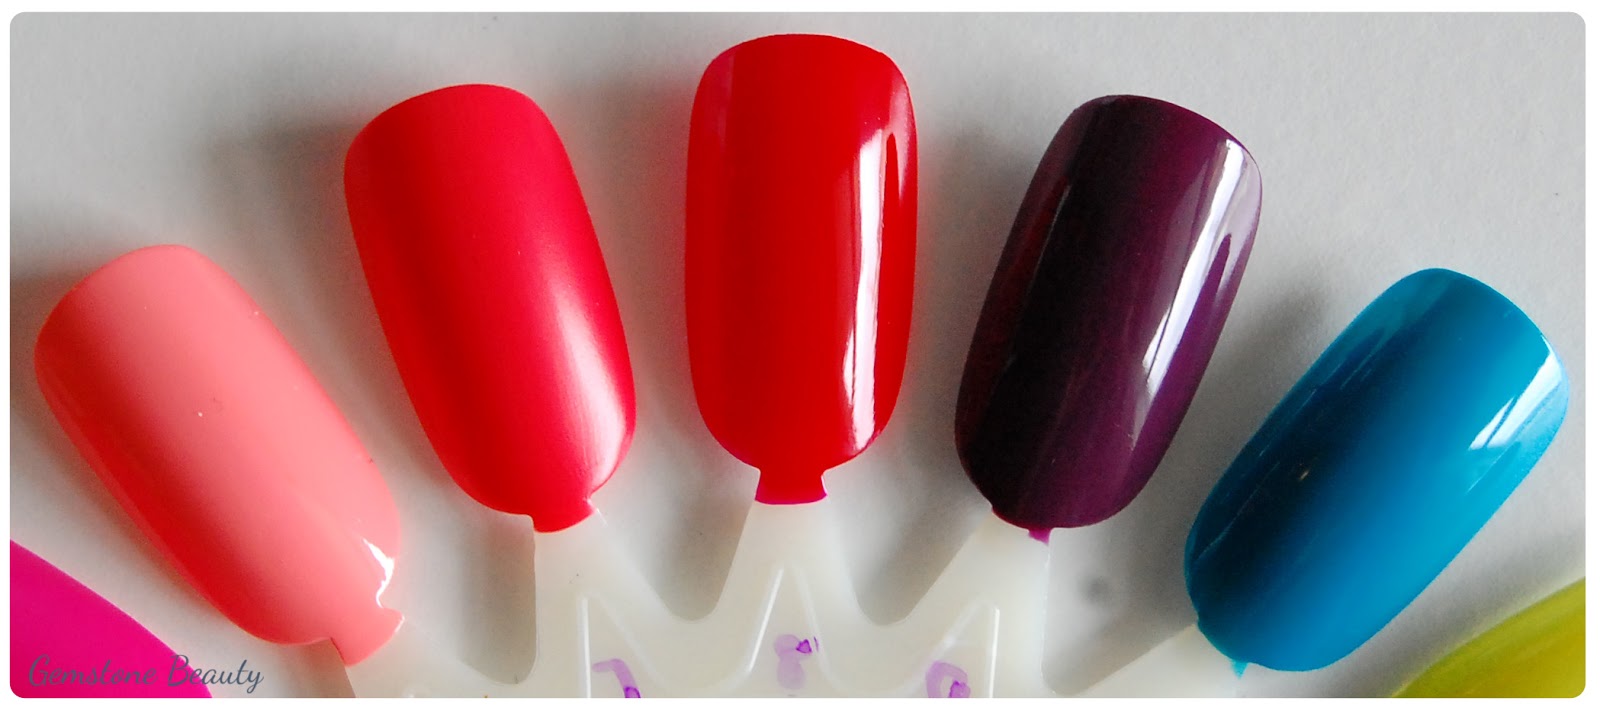 Gemstone Beauty: essence gel nail polish: Review + Swatches